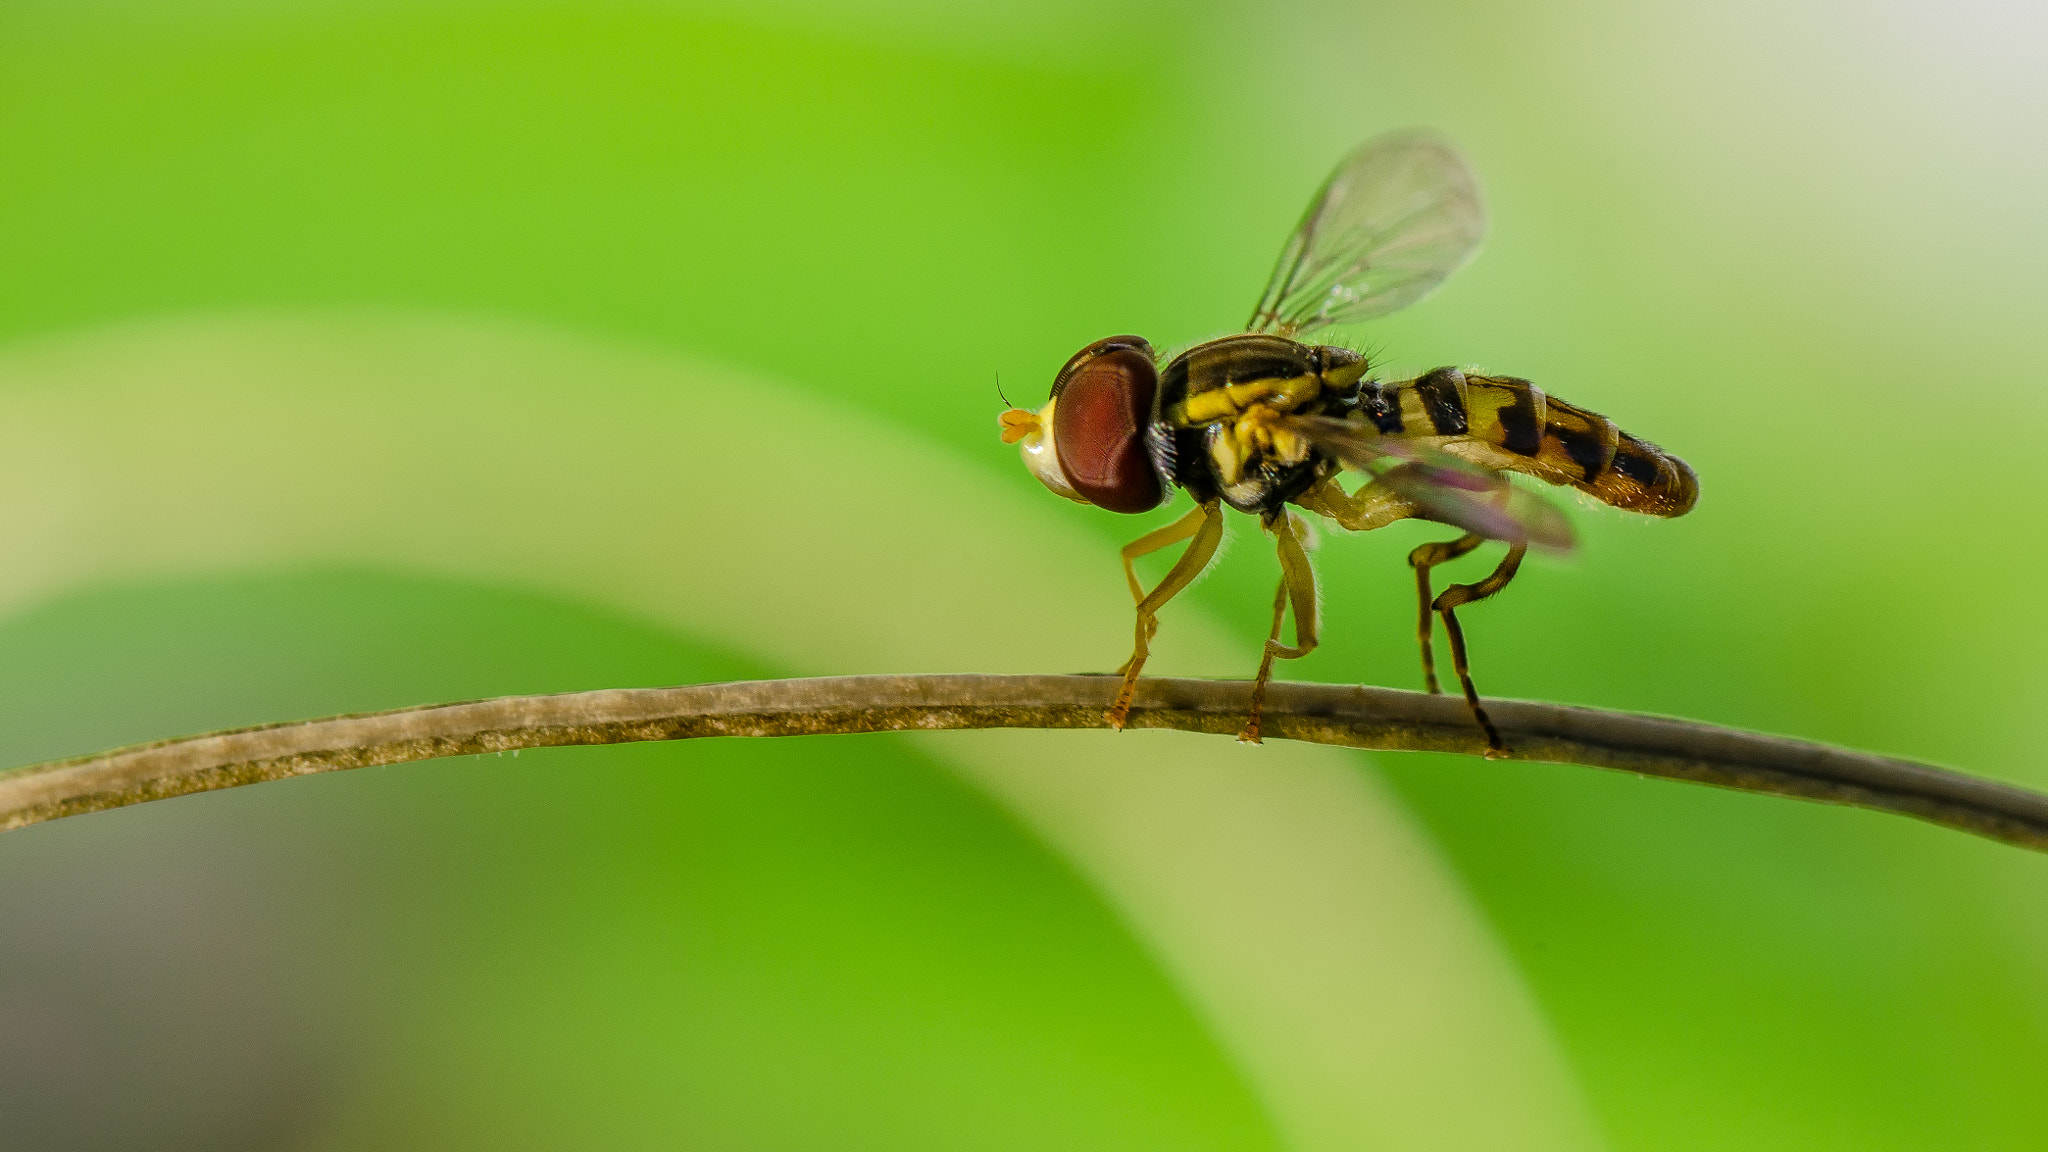 Nikon D5100 + Tamron SP 90mm F2.8 Di VC USD 1:1 Macro sample photo. Hoverfly on a stem photography